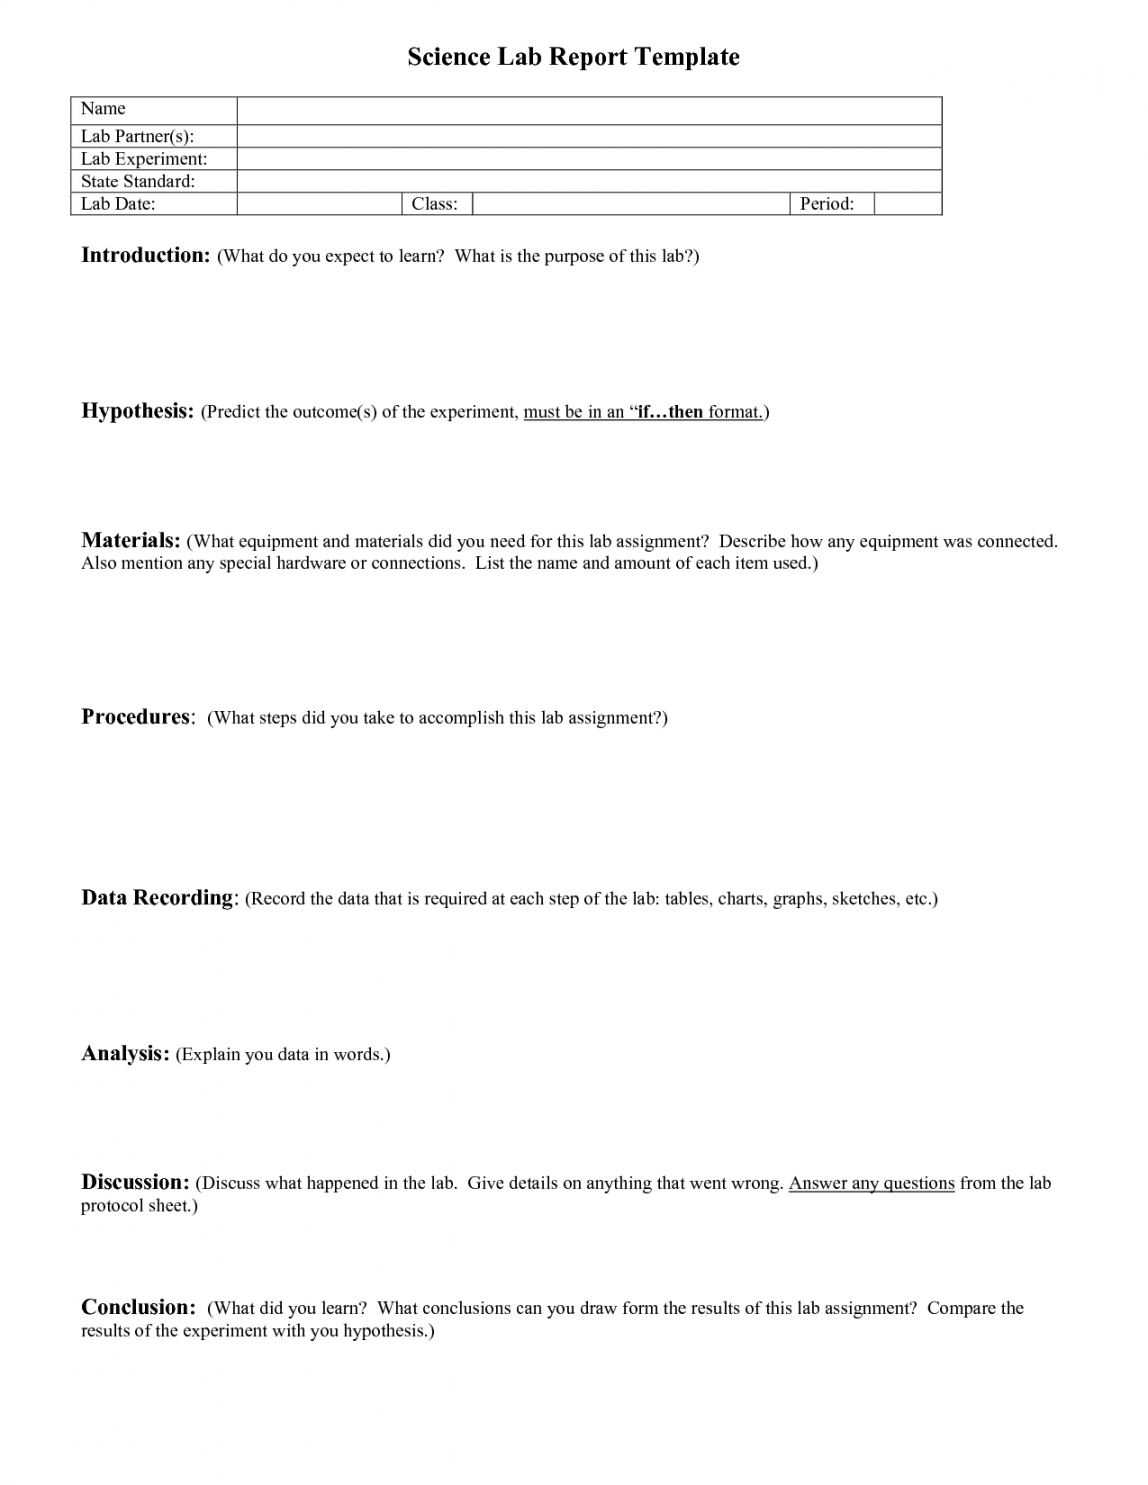 Free Lab Report Outline Science Lab Report Template School Throughout Science Lab Report Template